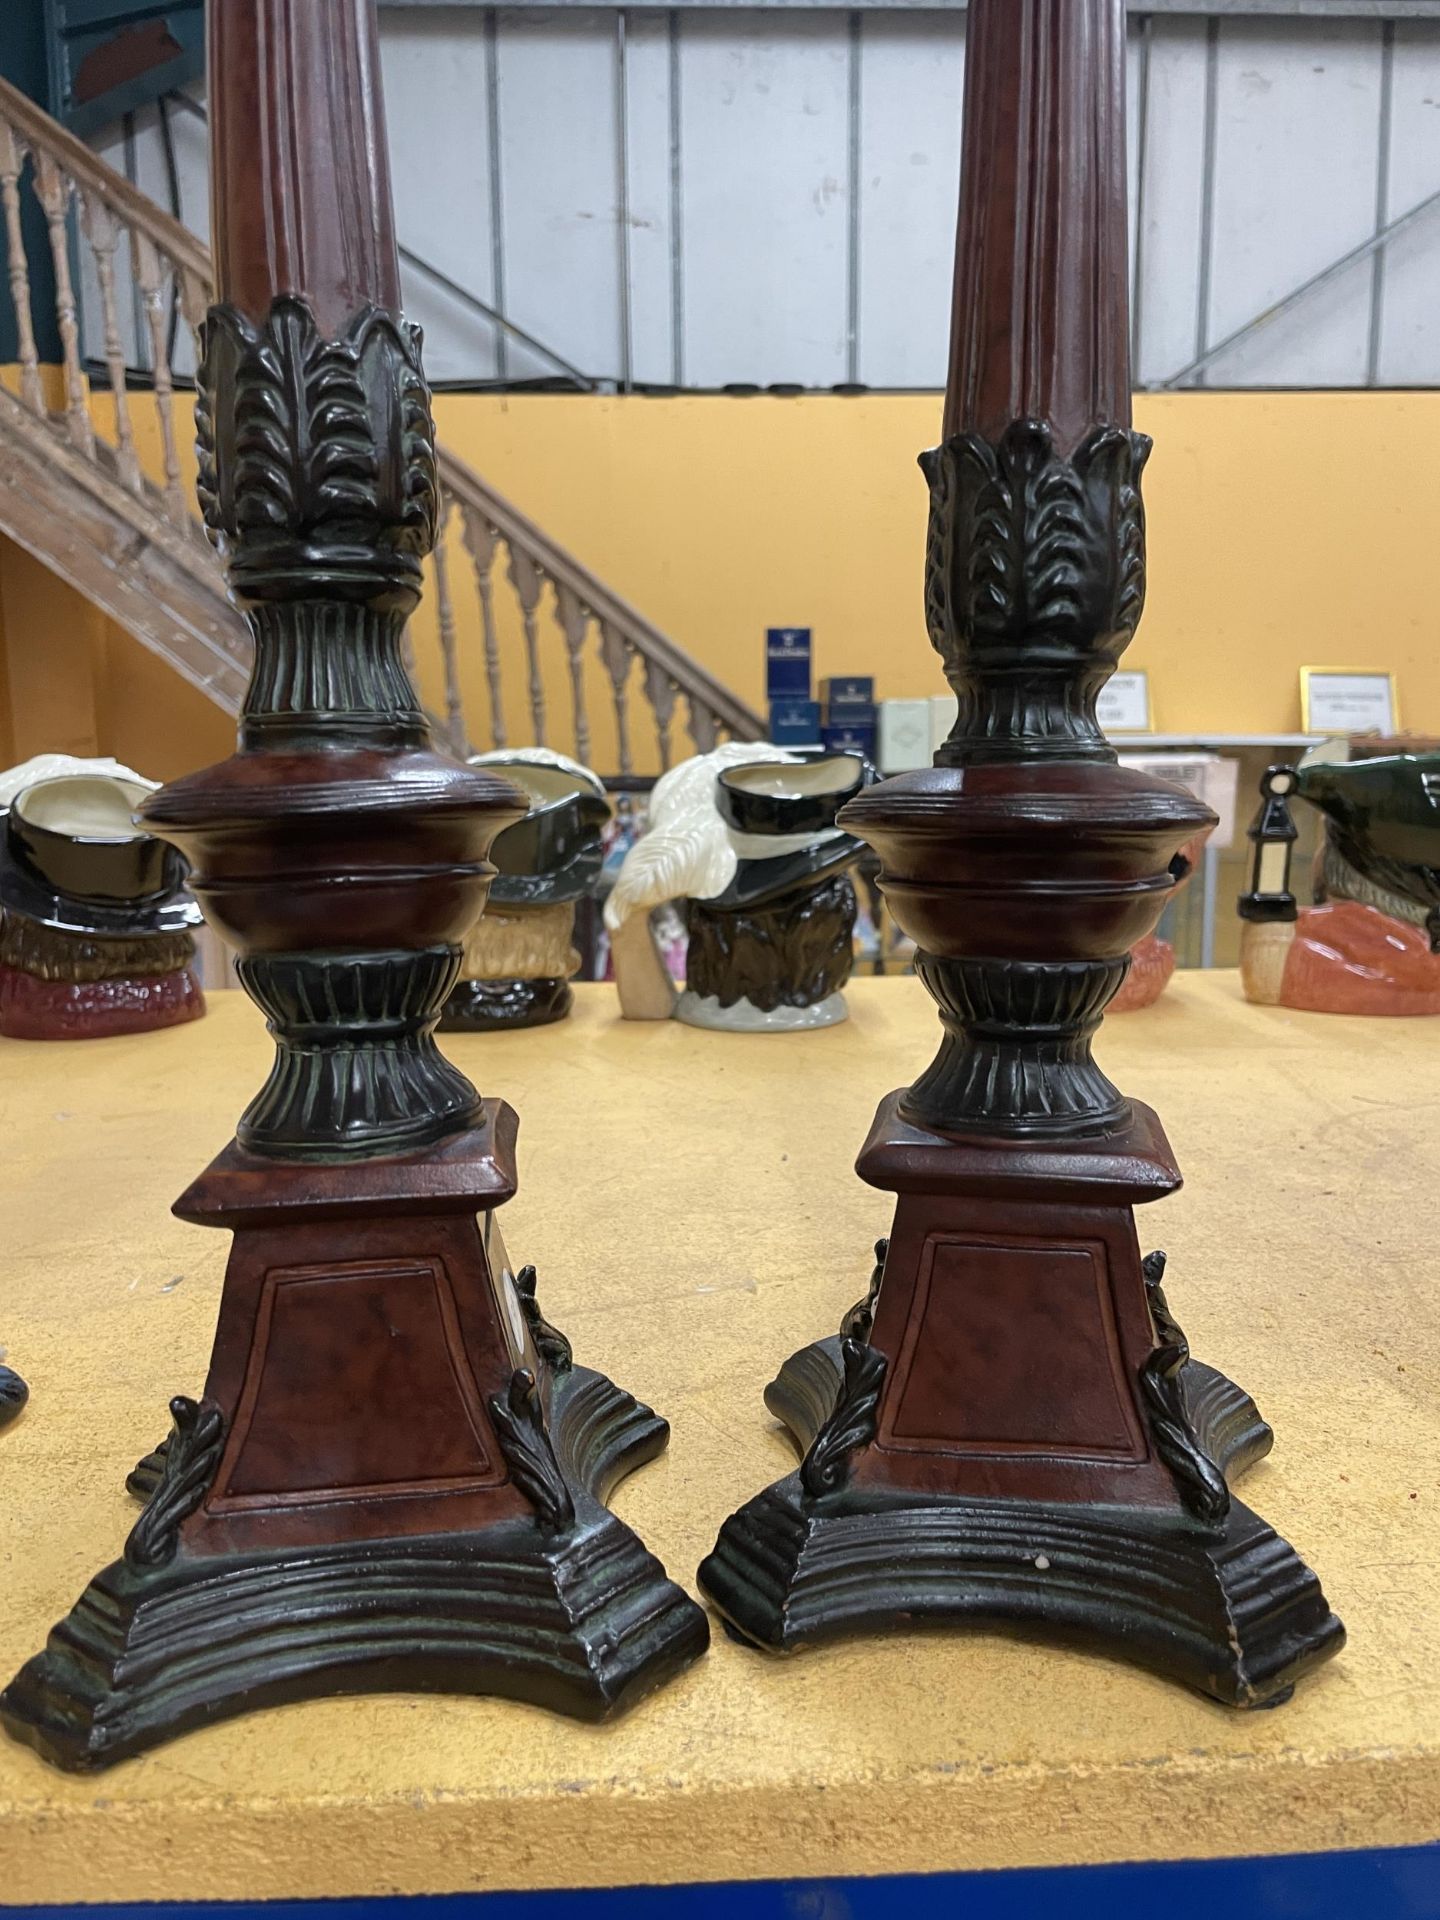 A PAIR OF MODERN ORNATE CANDLE HOLDERS - Image 2 of 3